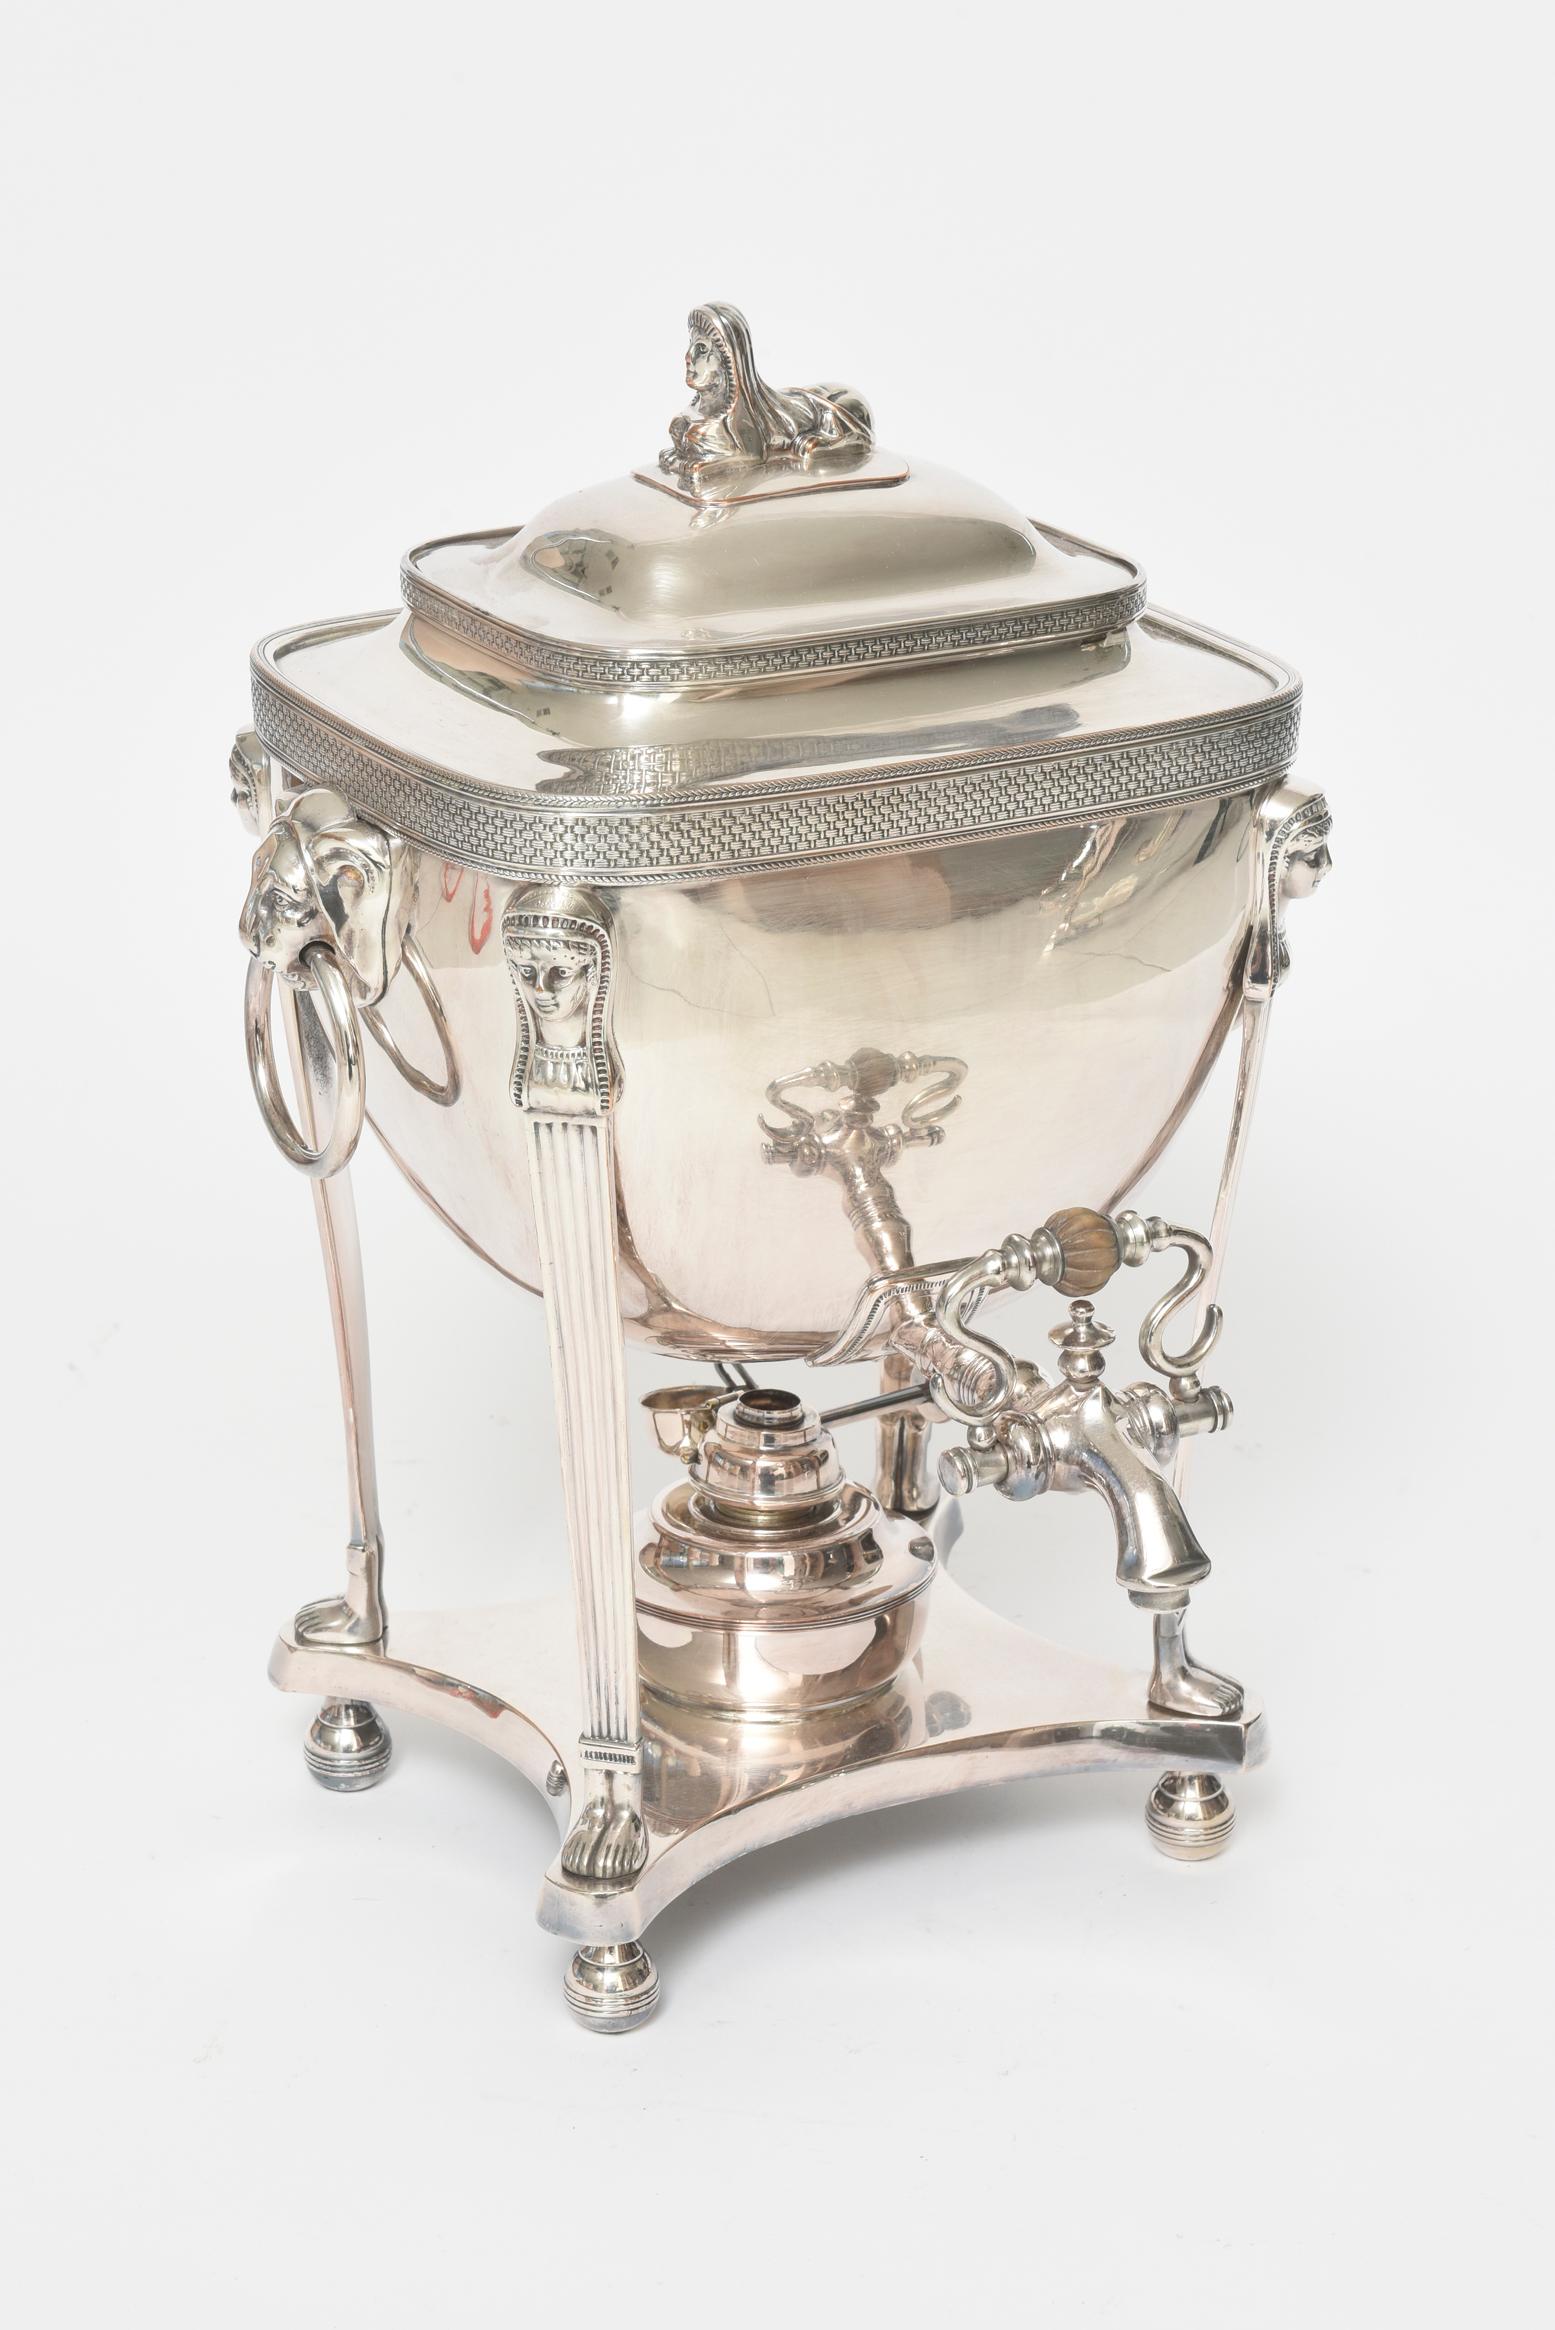 This late 19th century silver plated coffee urn is the perfect example of Egyptian Revival. The lid is adorned with a sphinx at its top. Going down, its beautiful shape is adorned with braided inset borders. Below are lions head ring in mouth